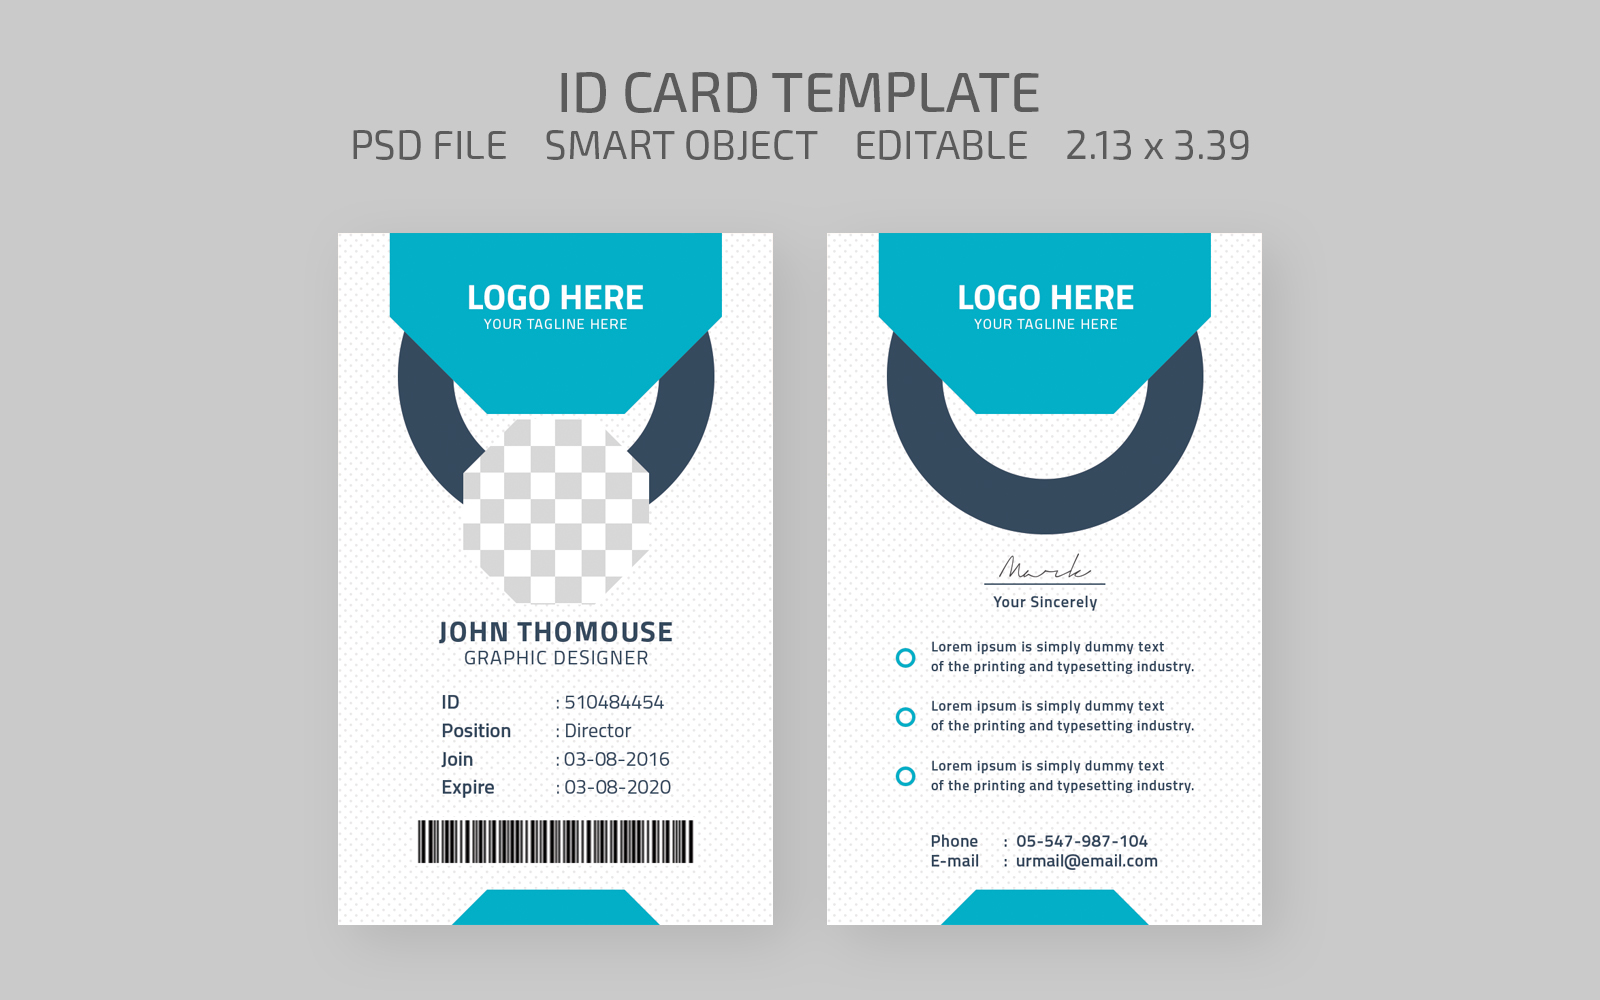 Graphic Designer ID Card Layout - Corporate Identity Template